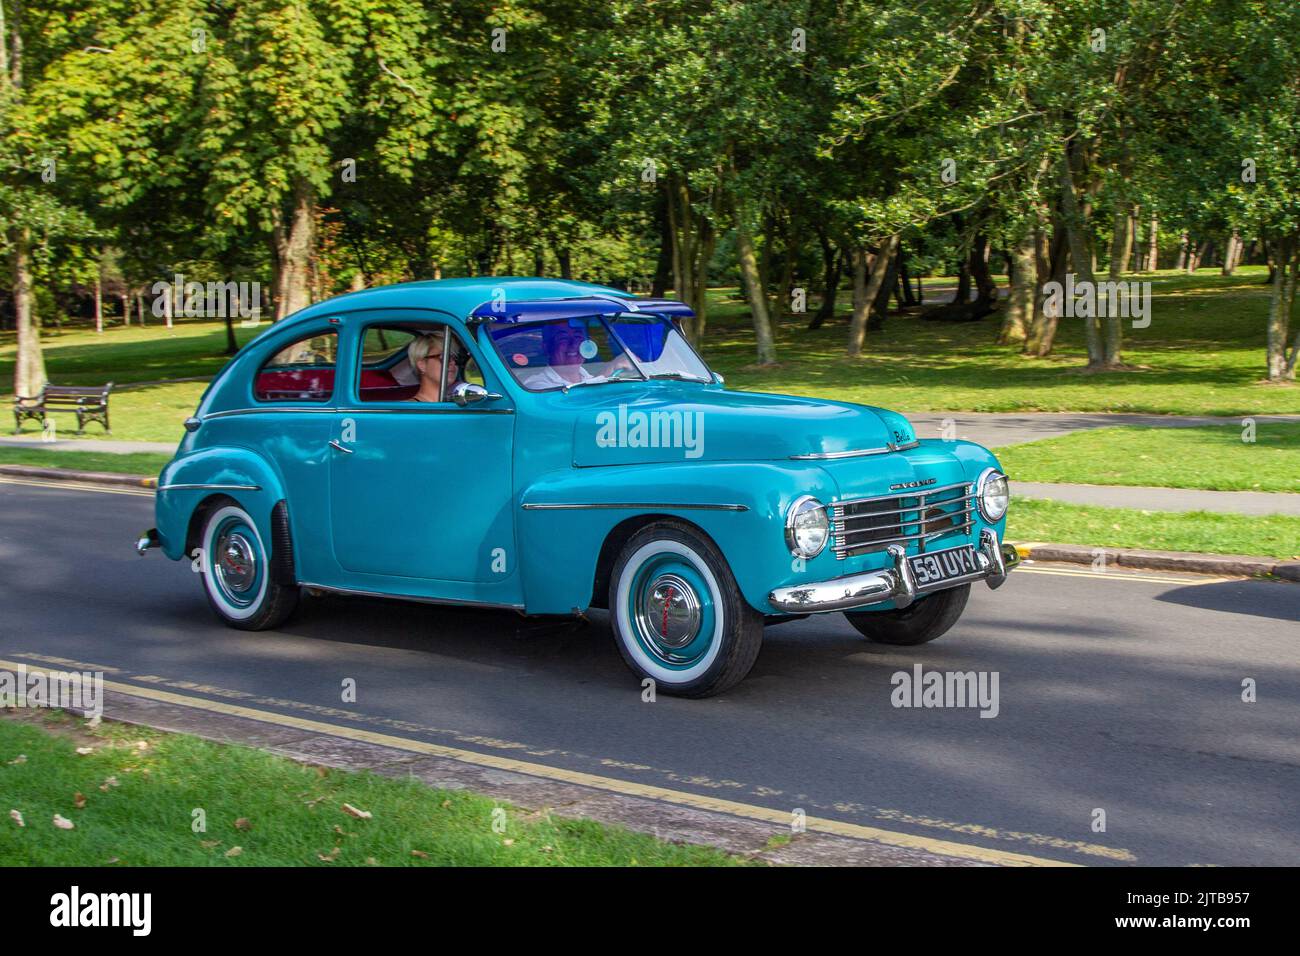 1954 50s anni '50 Blue VOLVO PV444-HB 1414cc berlina svedese a benzina; auto in arrivo all'annuale Stanley Park Classic Car Show nei giardini del parco. Stanley Park Classics Yesteryear Motor Show Hosted by Blackpool Vintage Vehicle Preservation Group, UK. Foto Stock